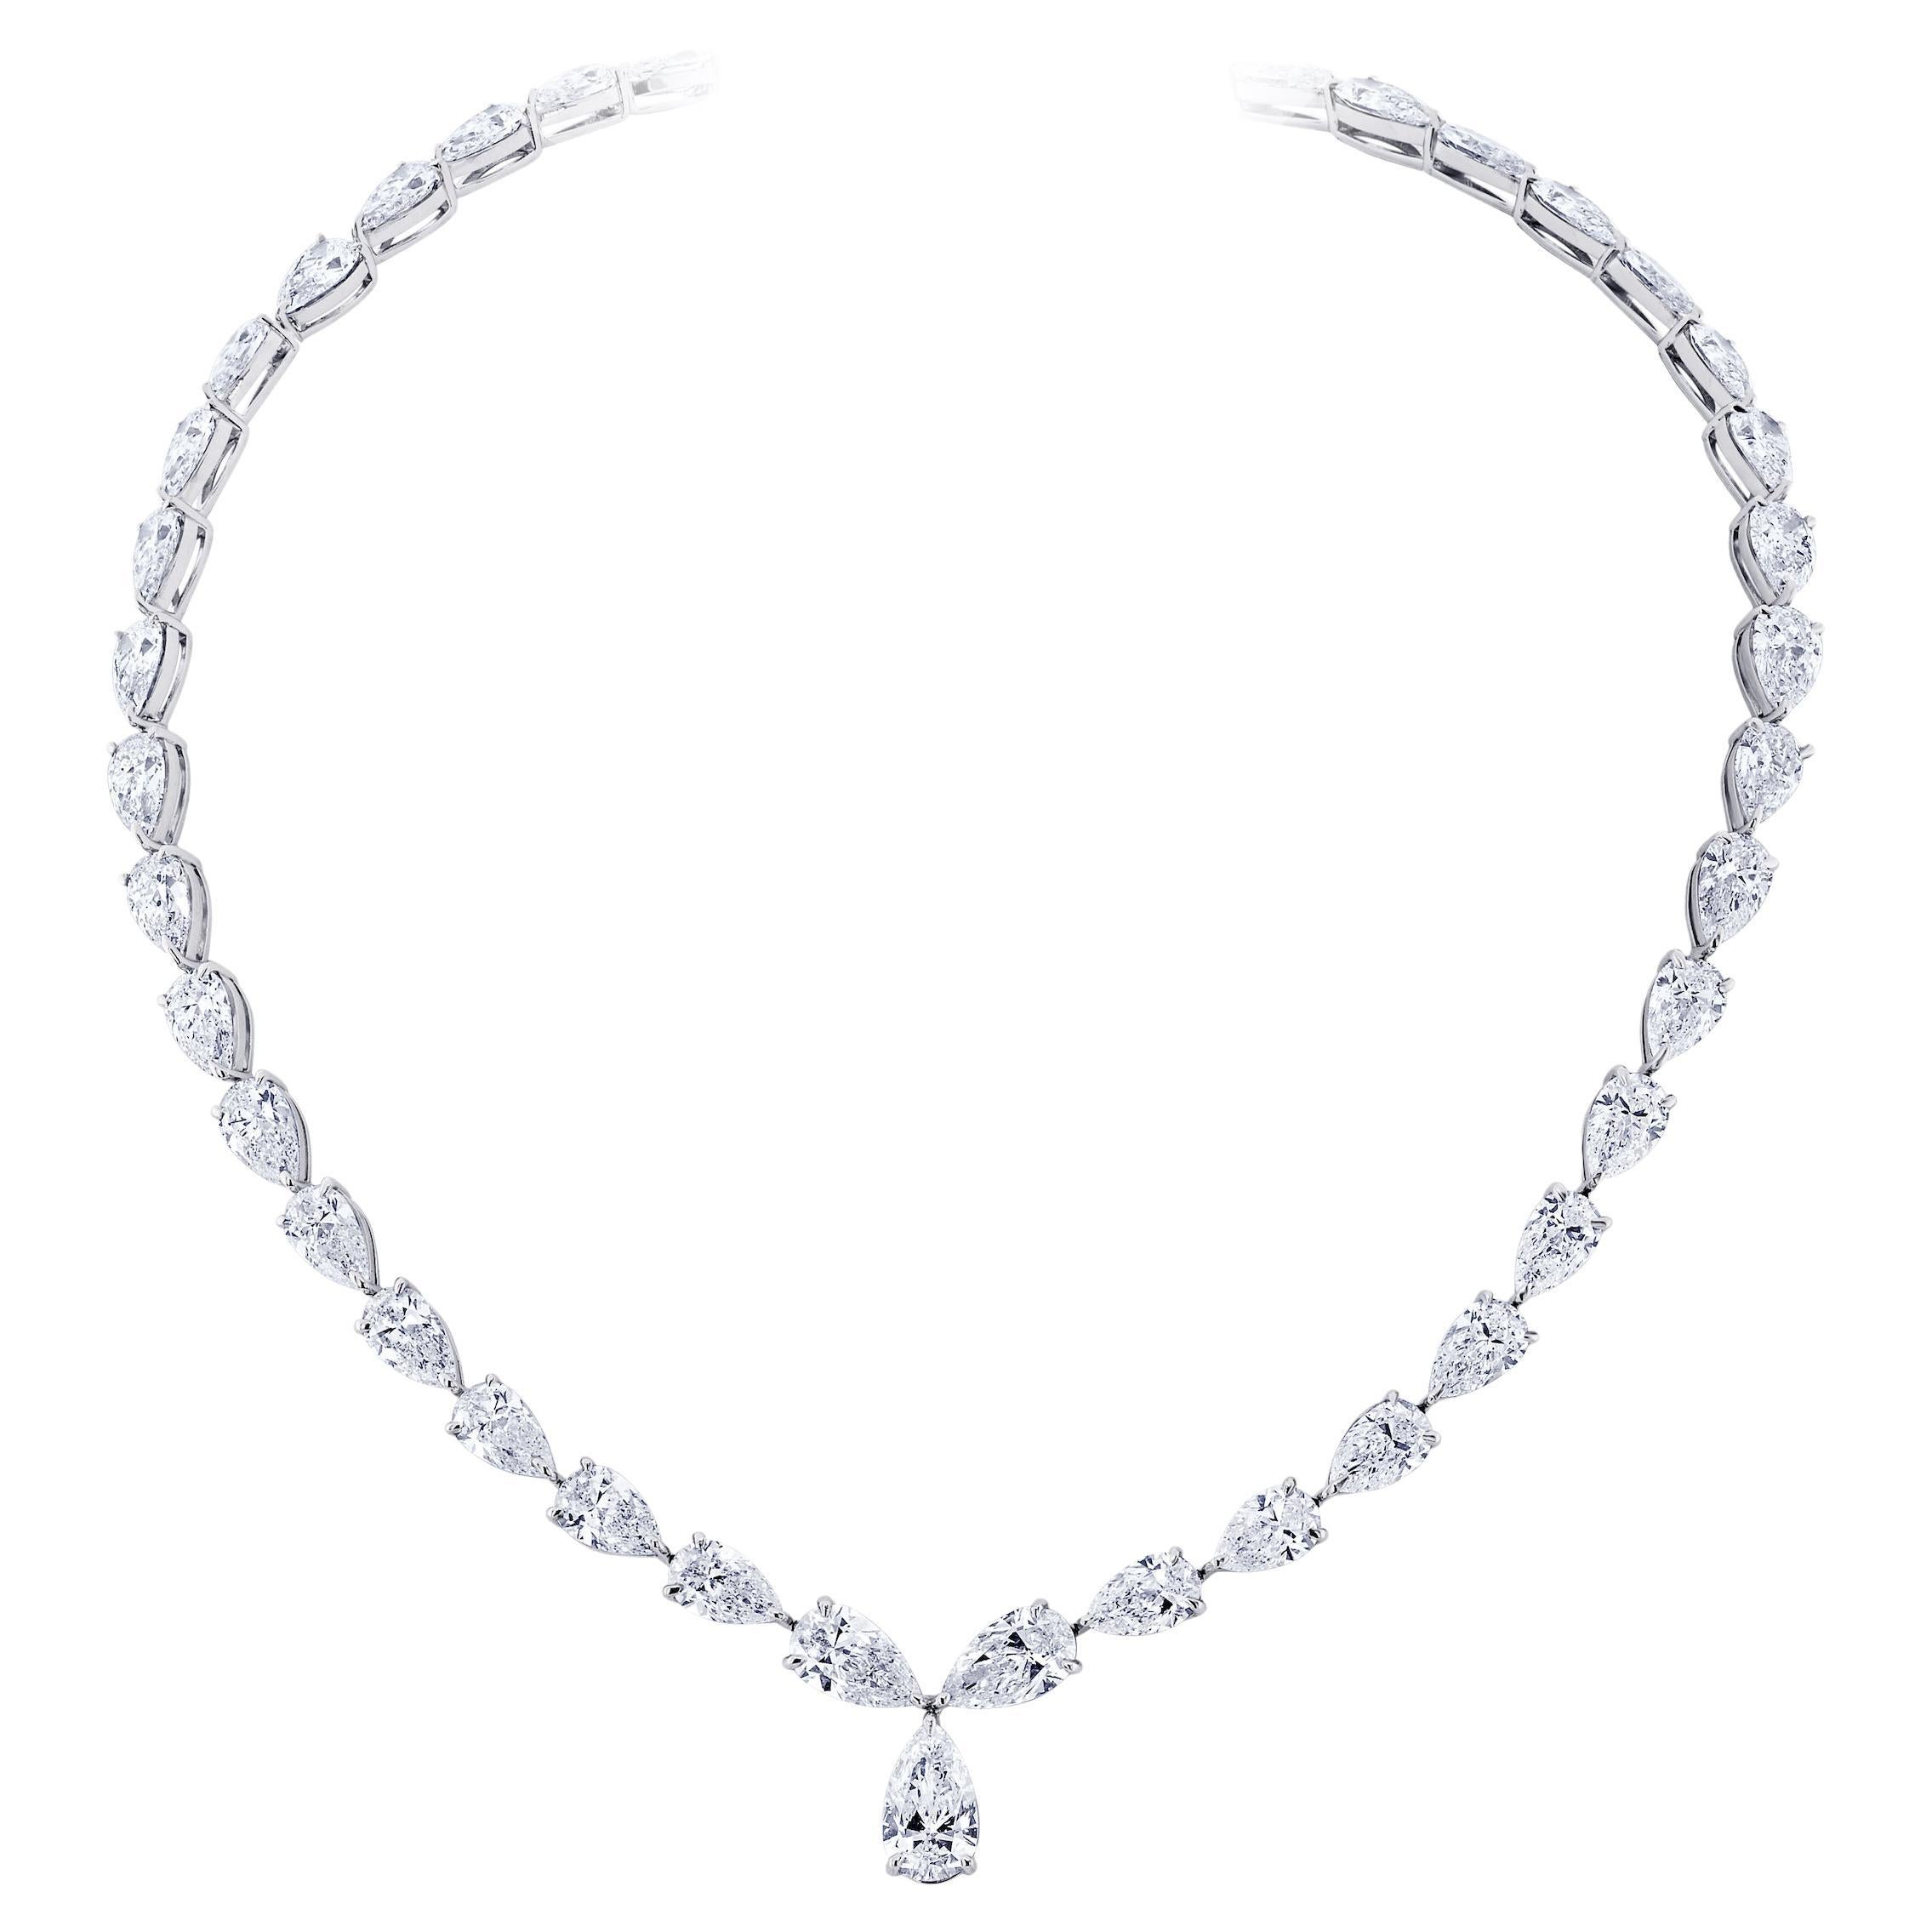 GIA Certified Pear Shape Diamond Riviera Necklace with 42.24 Carats